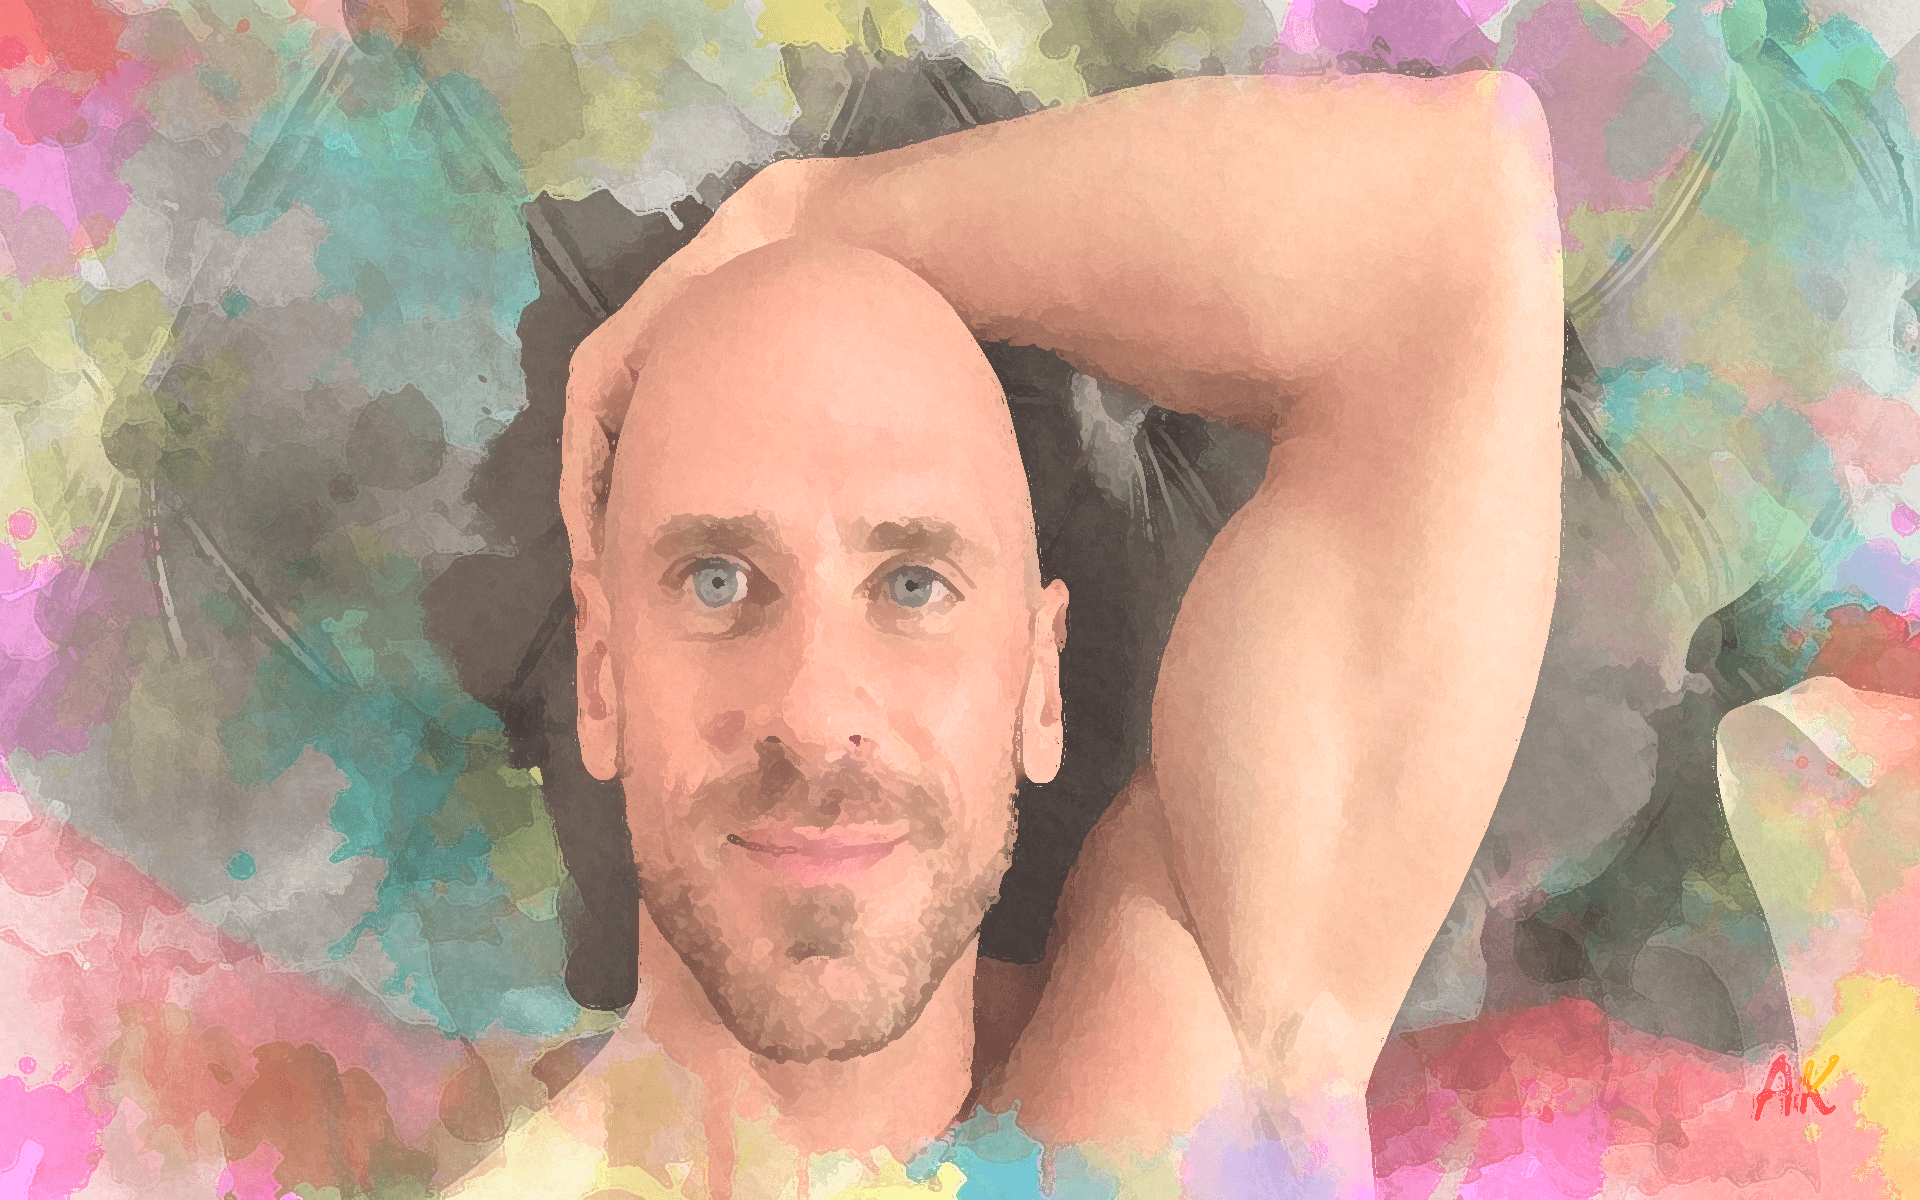 paiting with Johnny Sins - Celebrity paintings by AK | OpenSea